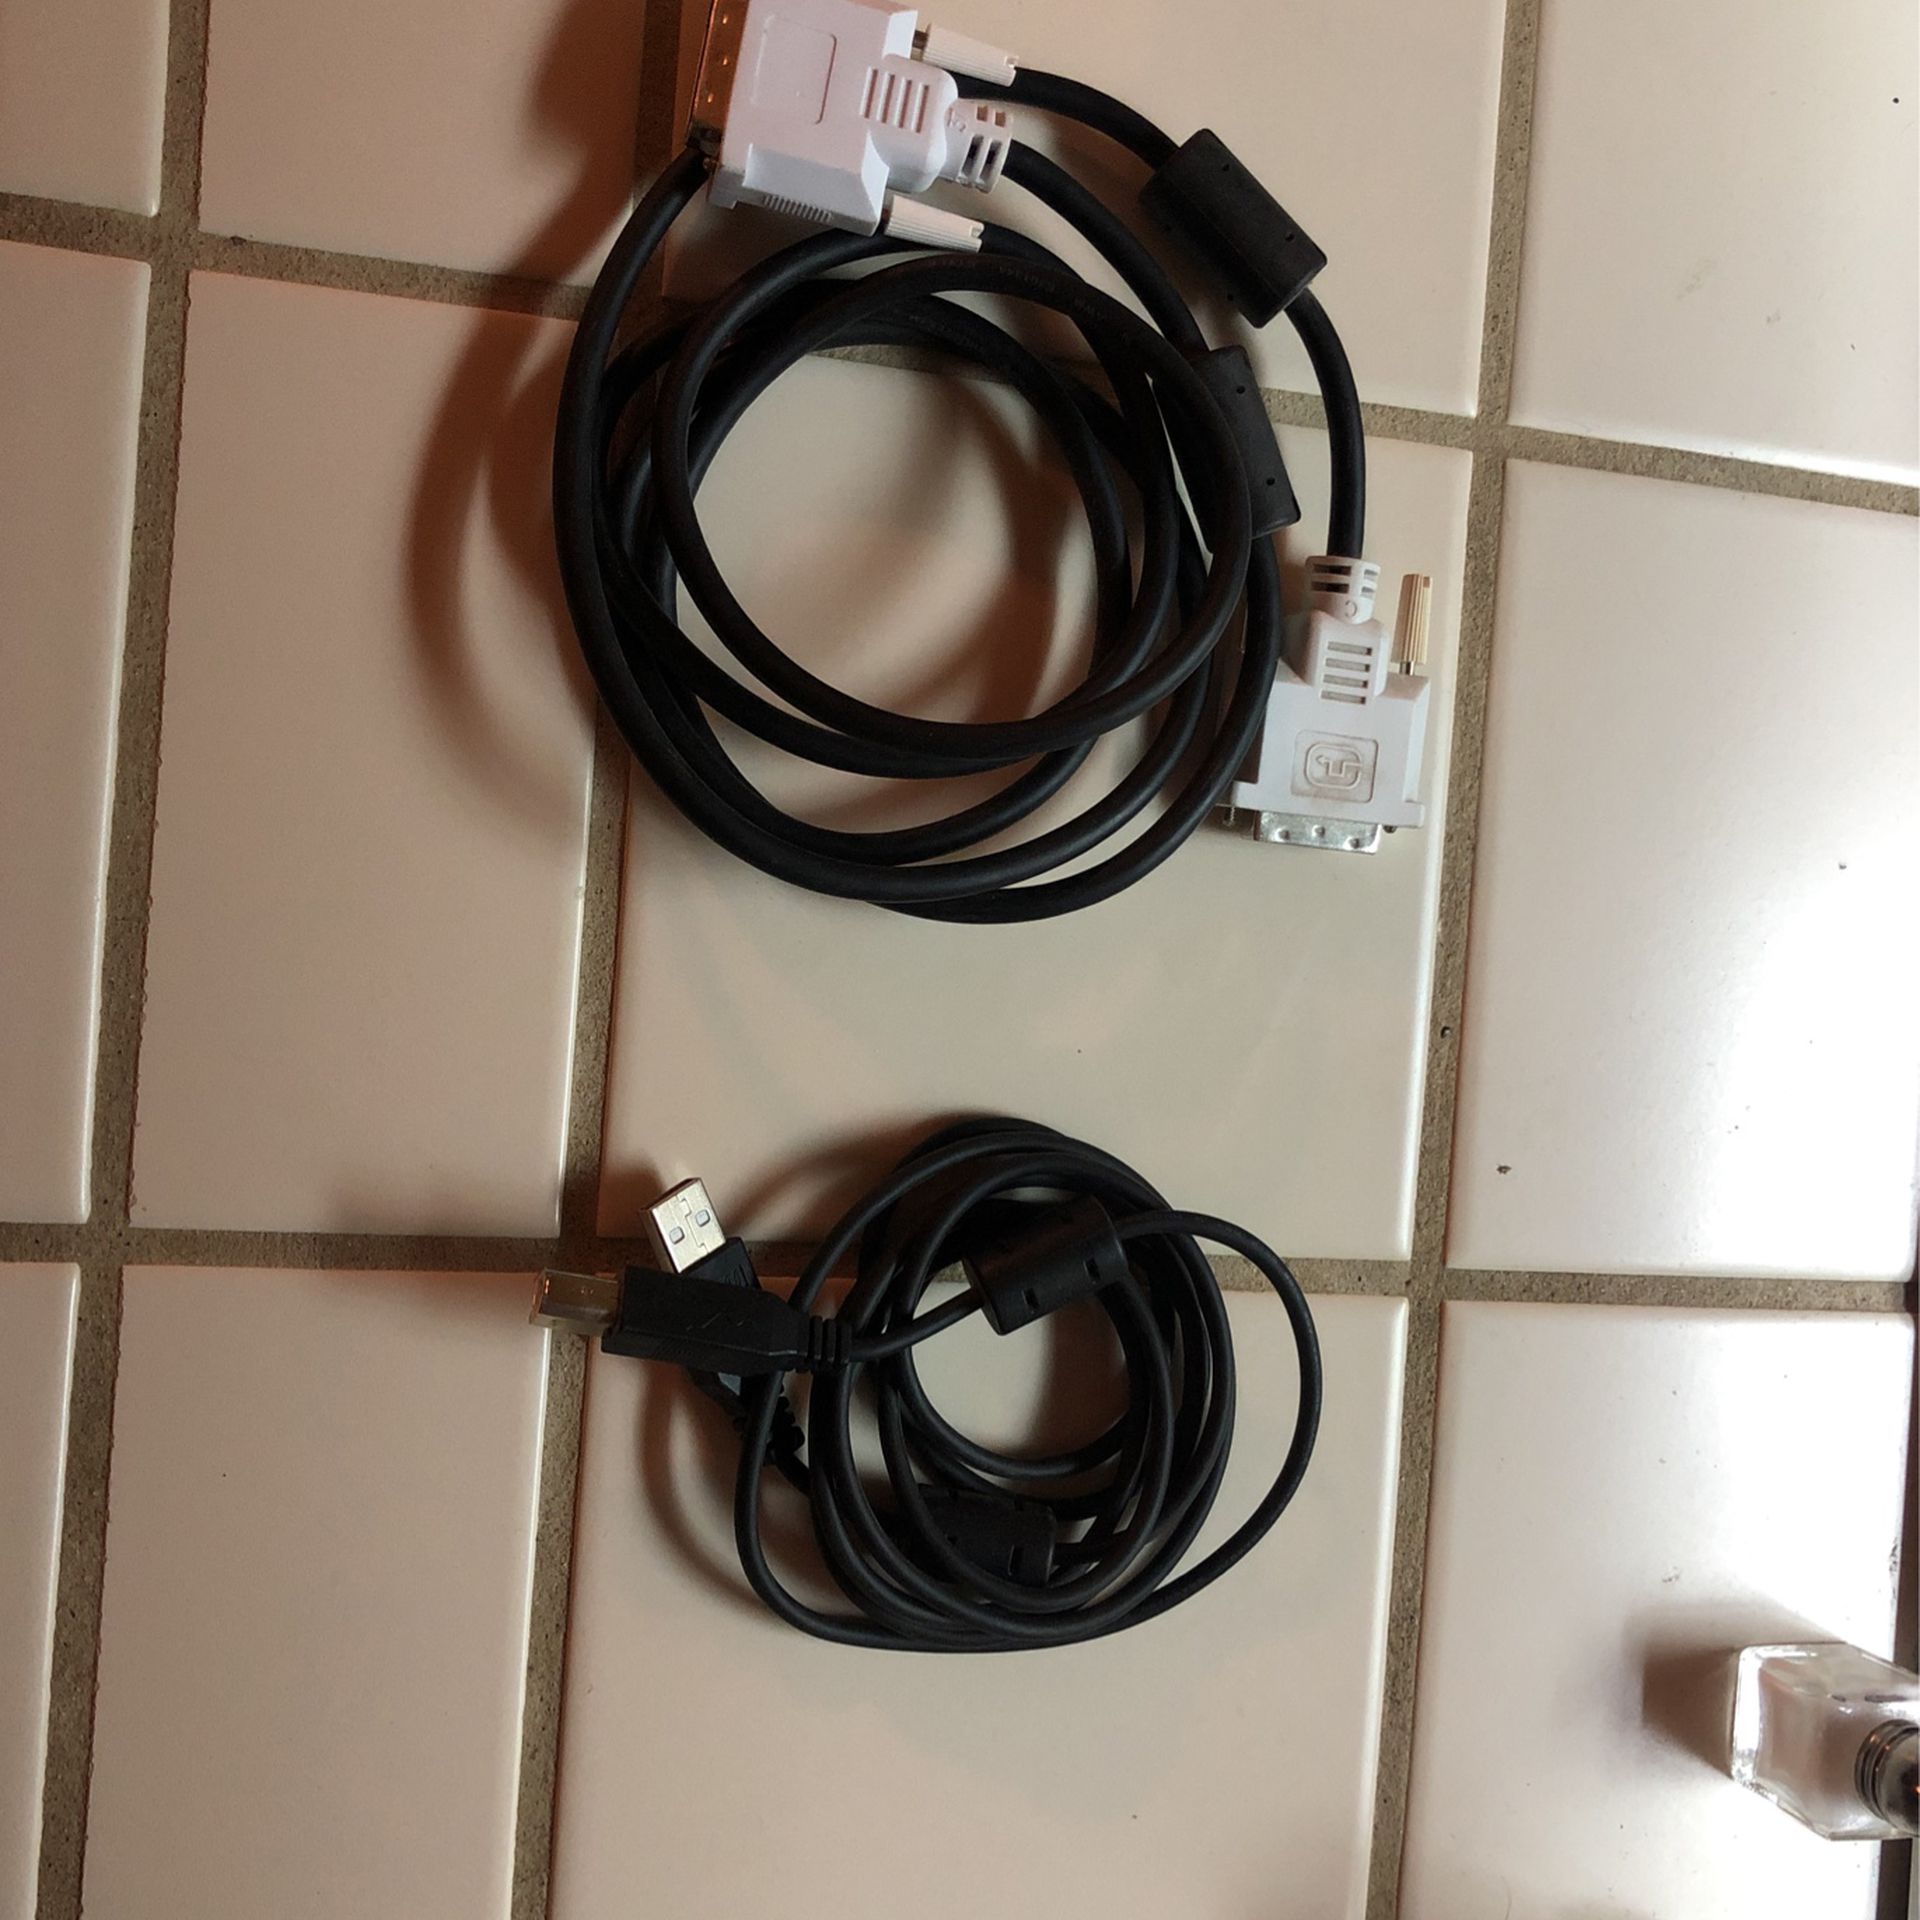 Monitor Cable, Printer Cable